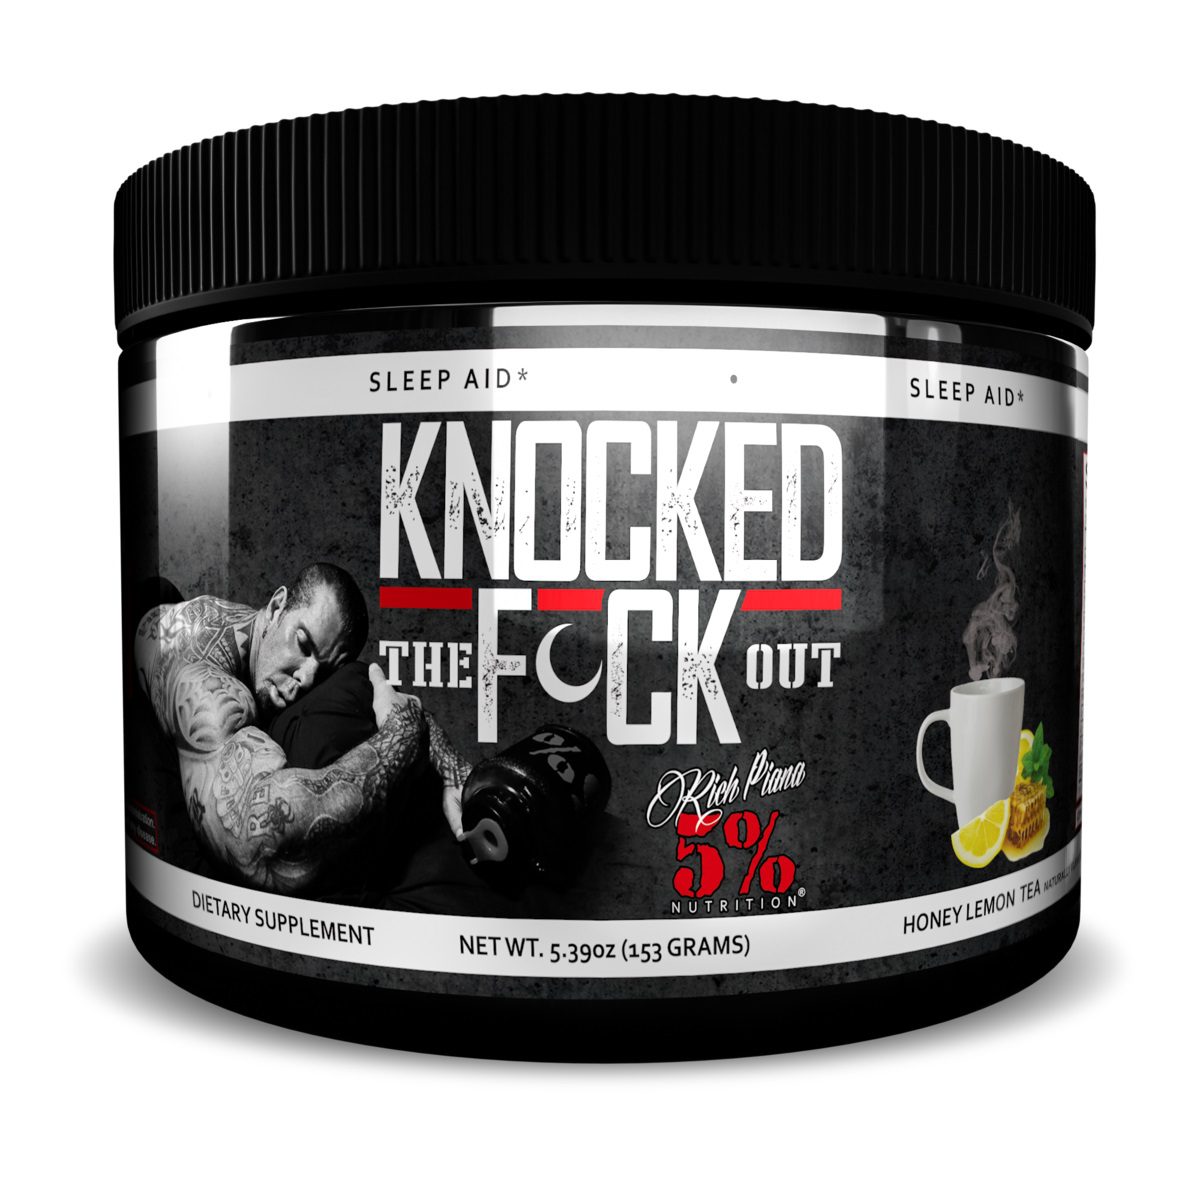 5% Nutrition - Knocked The F*ck Out